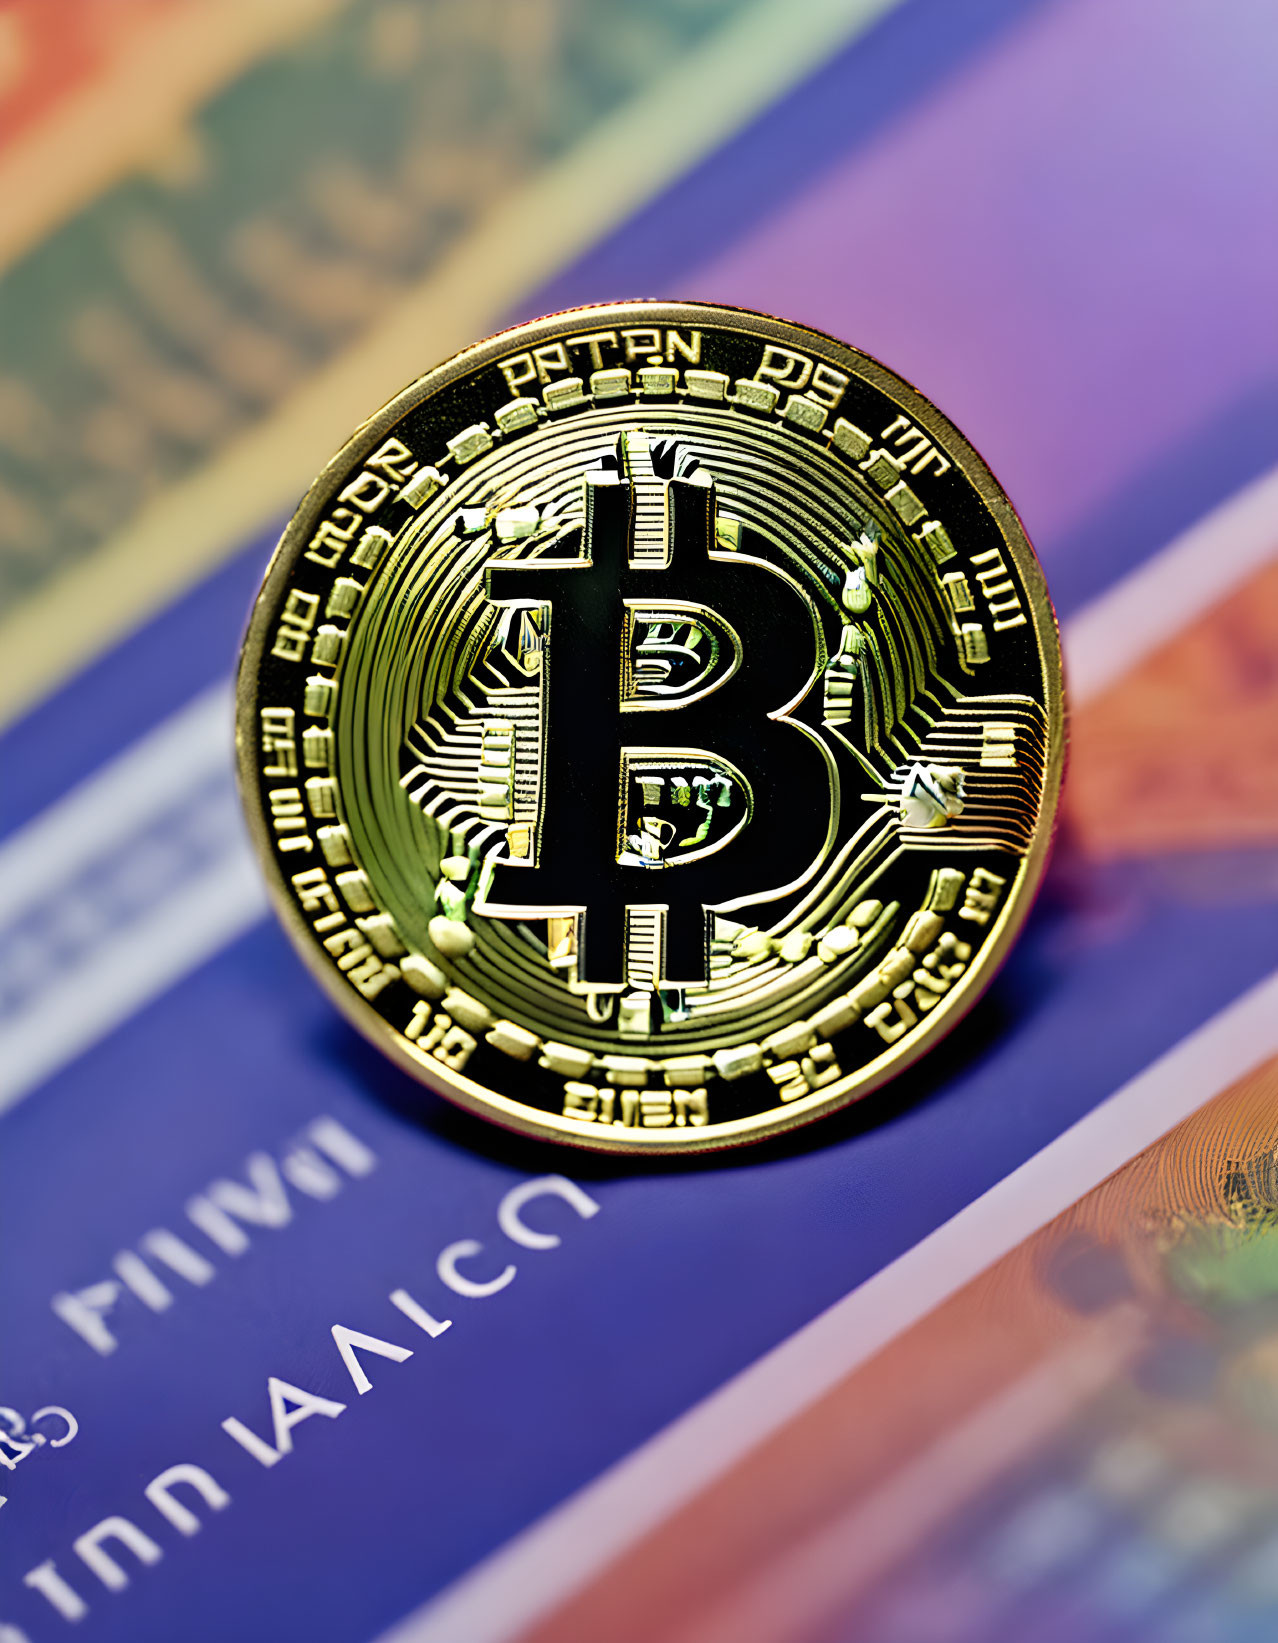 Golden Bitcoin on Colorful Banknotes: Cryptocurrency and Traditional Money Representation